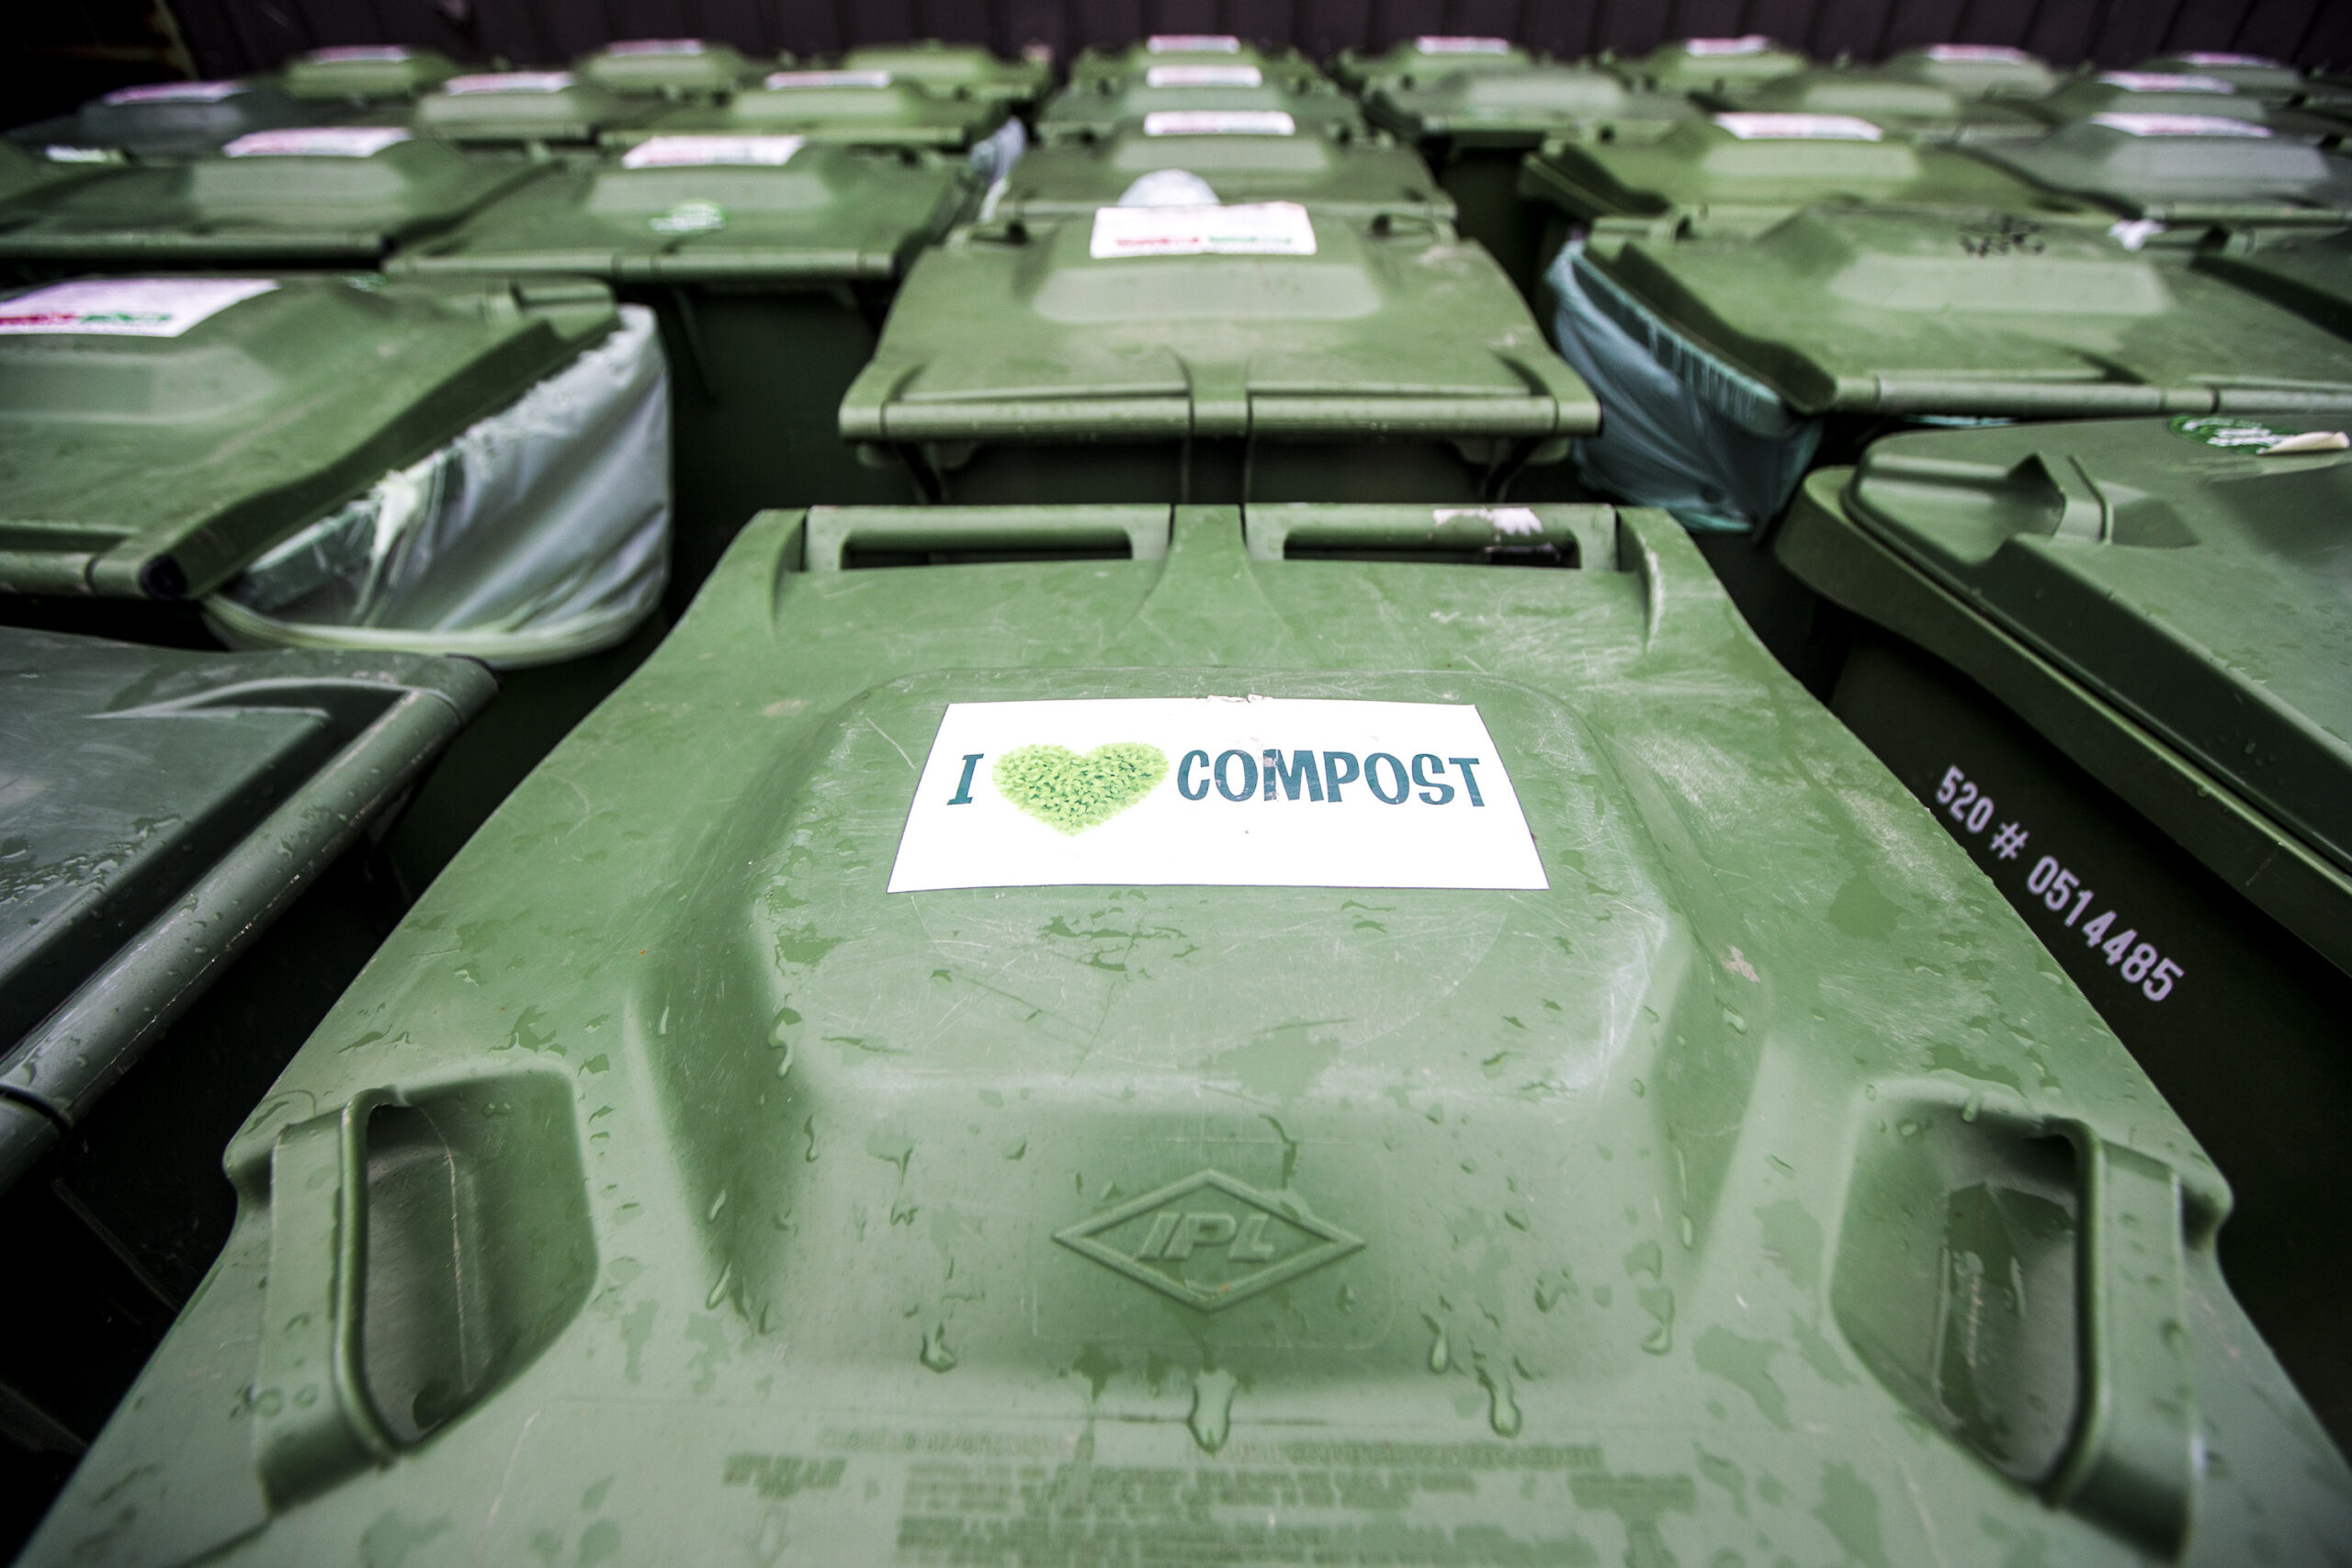 A green compost bin with a sticker reading 'I heart compost' sits among rows of similar bins at Compost Winnipeg headquarters